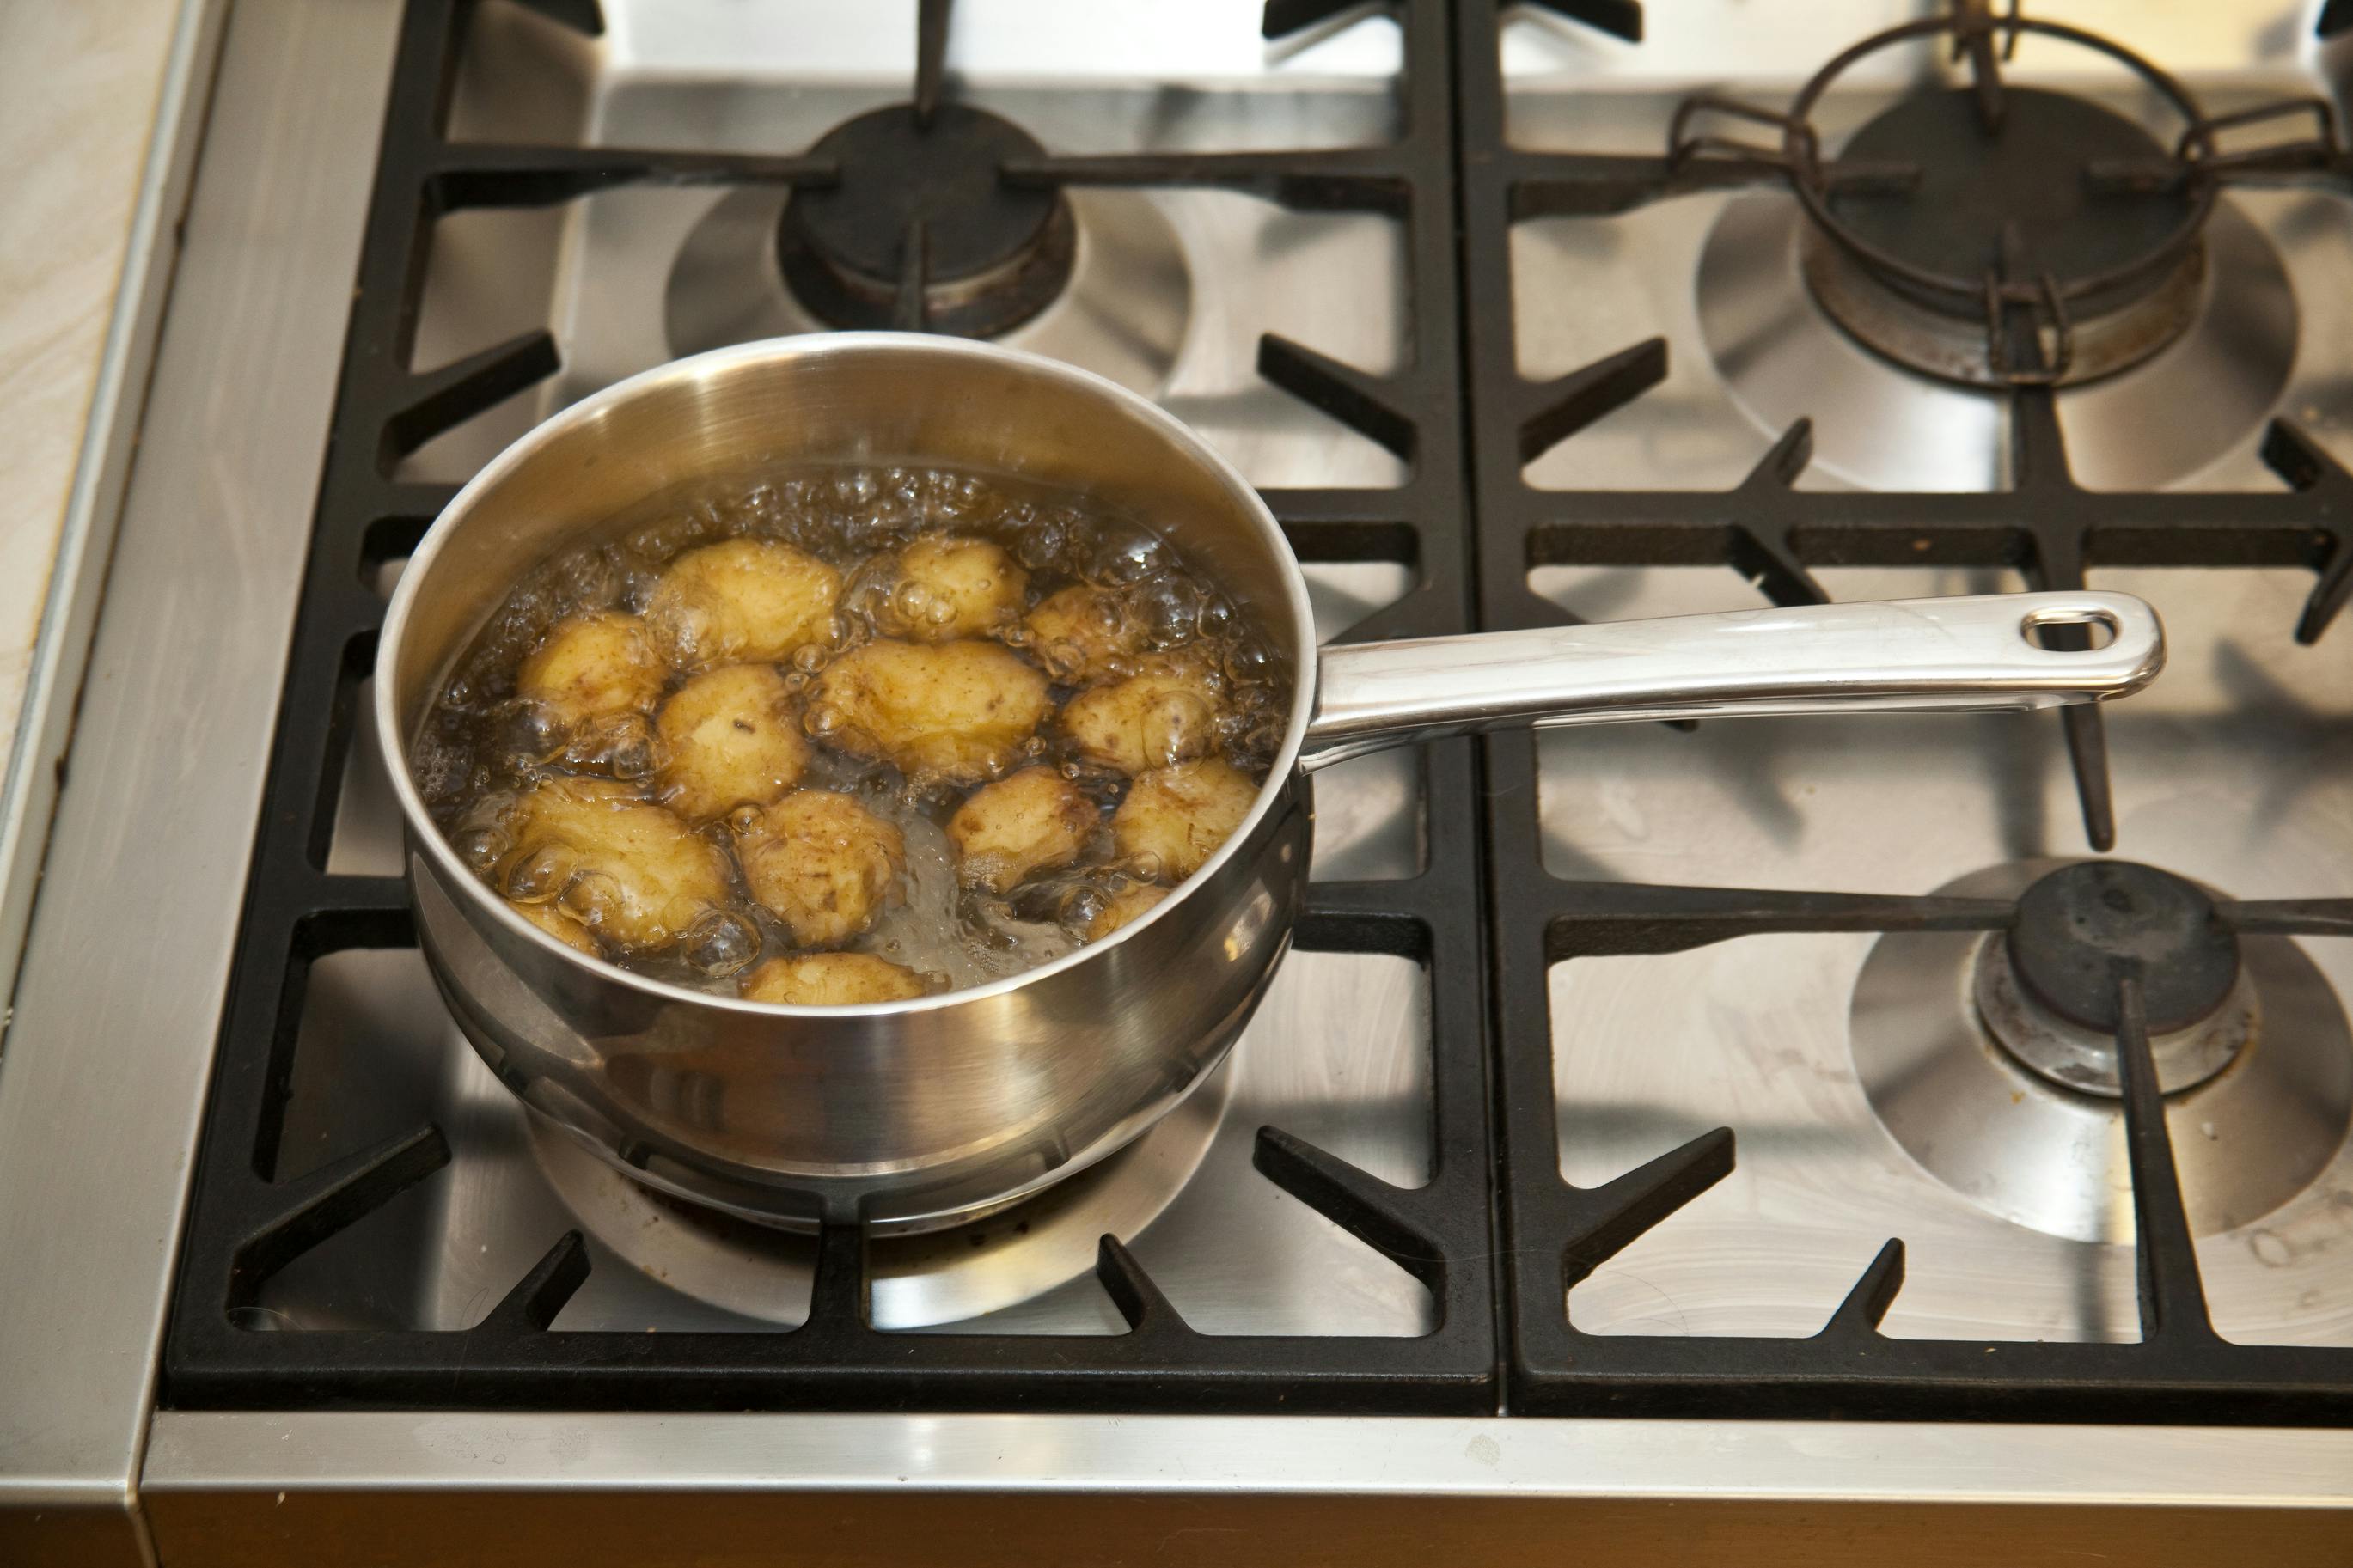 A pot of potatoes boiling on a stove.